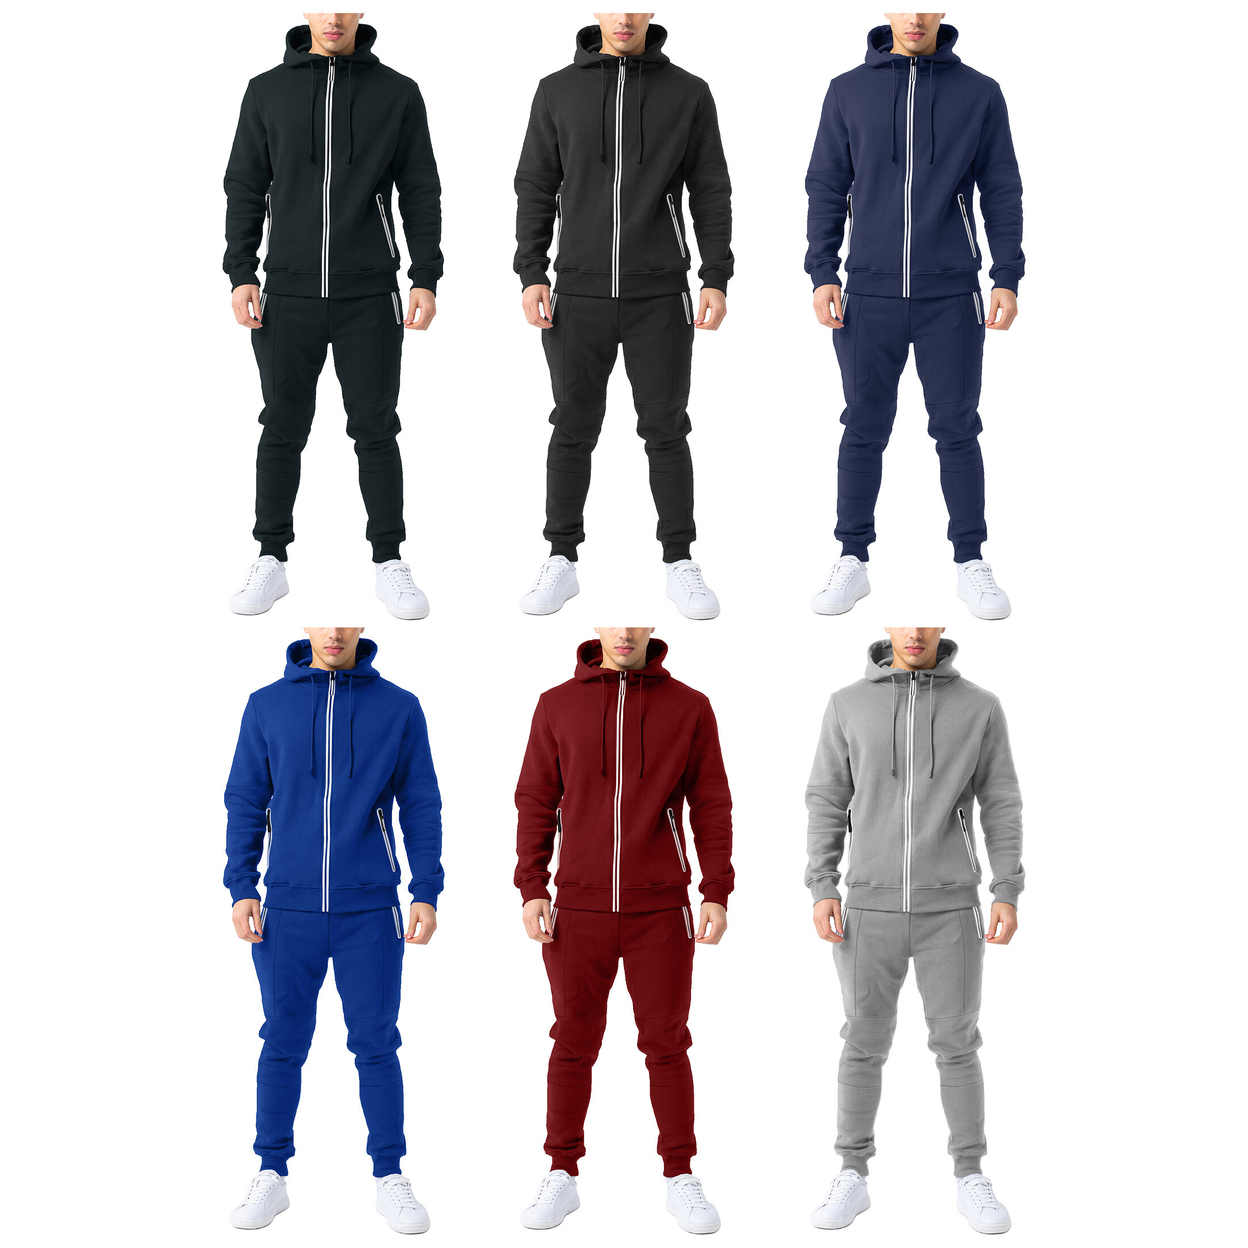 2-Pack: Men's Cozy Slim Fit Active Athletic Full Zip Hoodie And Jogger Tracksuit - Black & Blue, 3xl